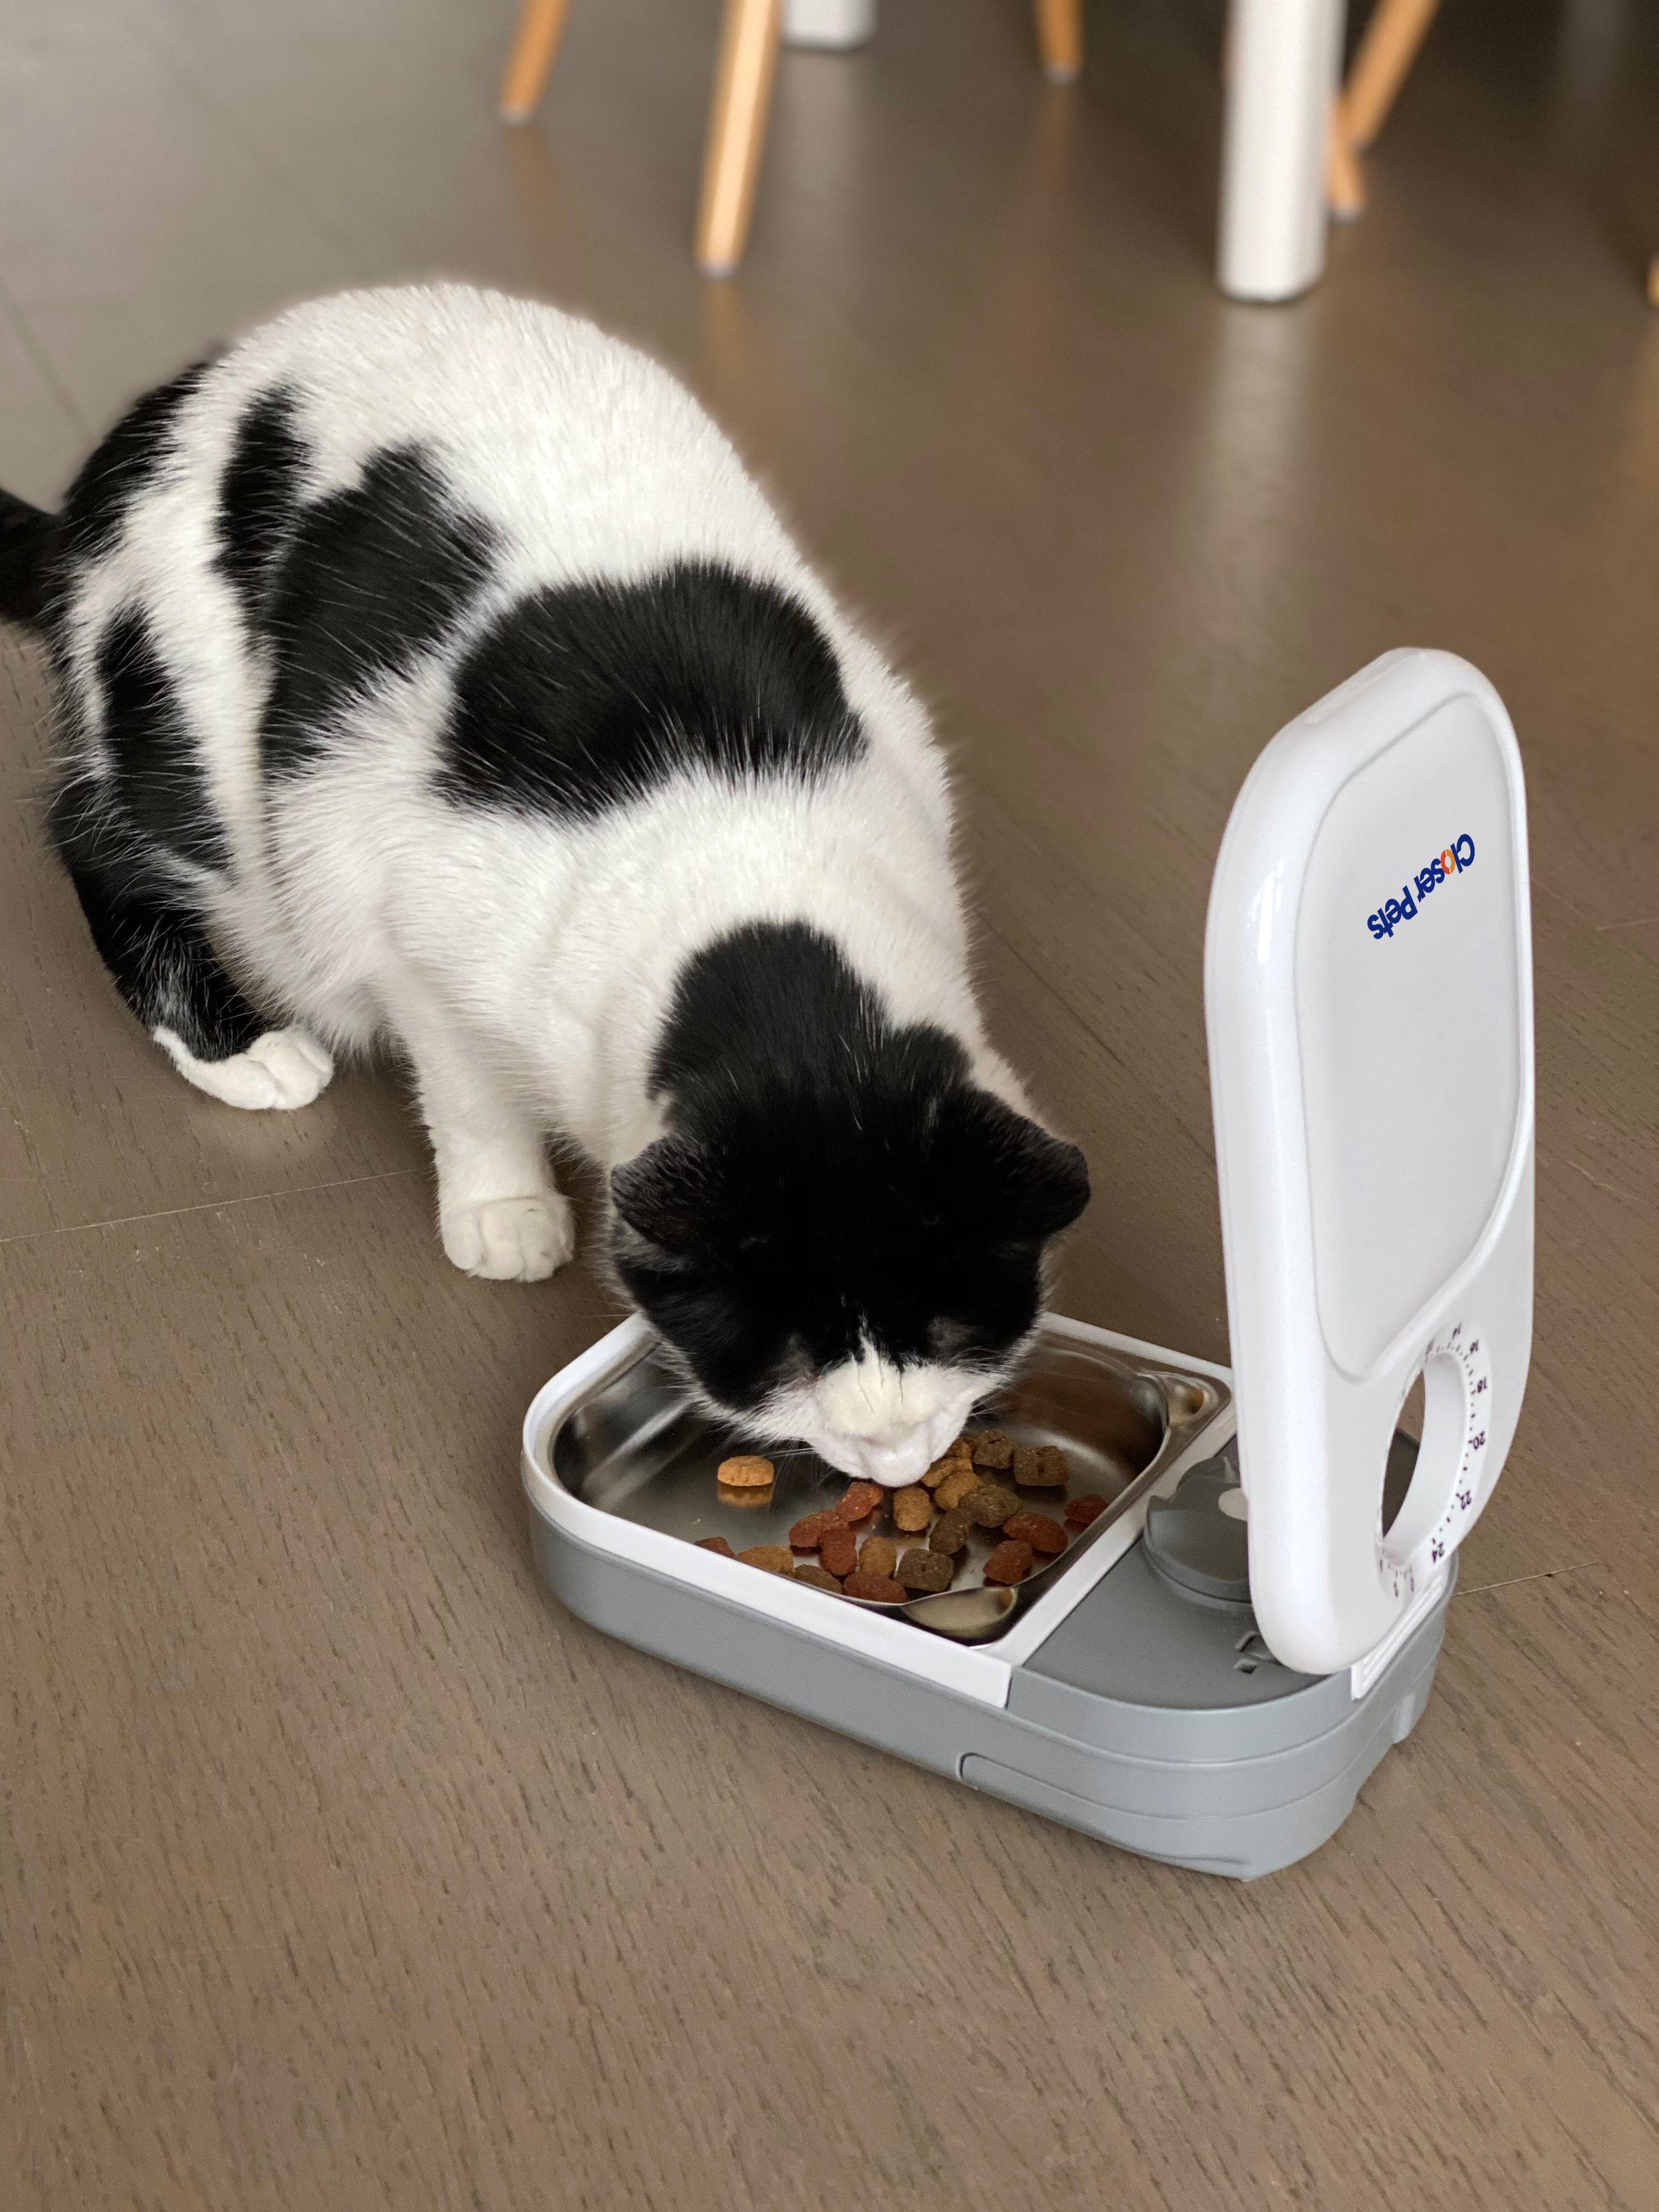 One-Meal Automatic Pet Feeder with Stainless Steel Bowl Inserts (C100)